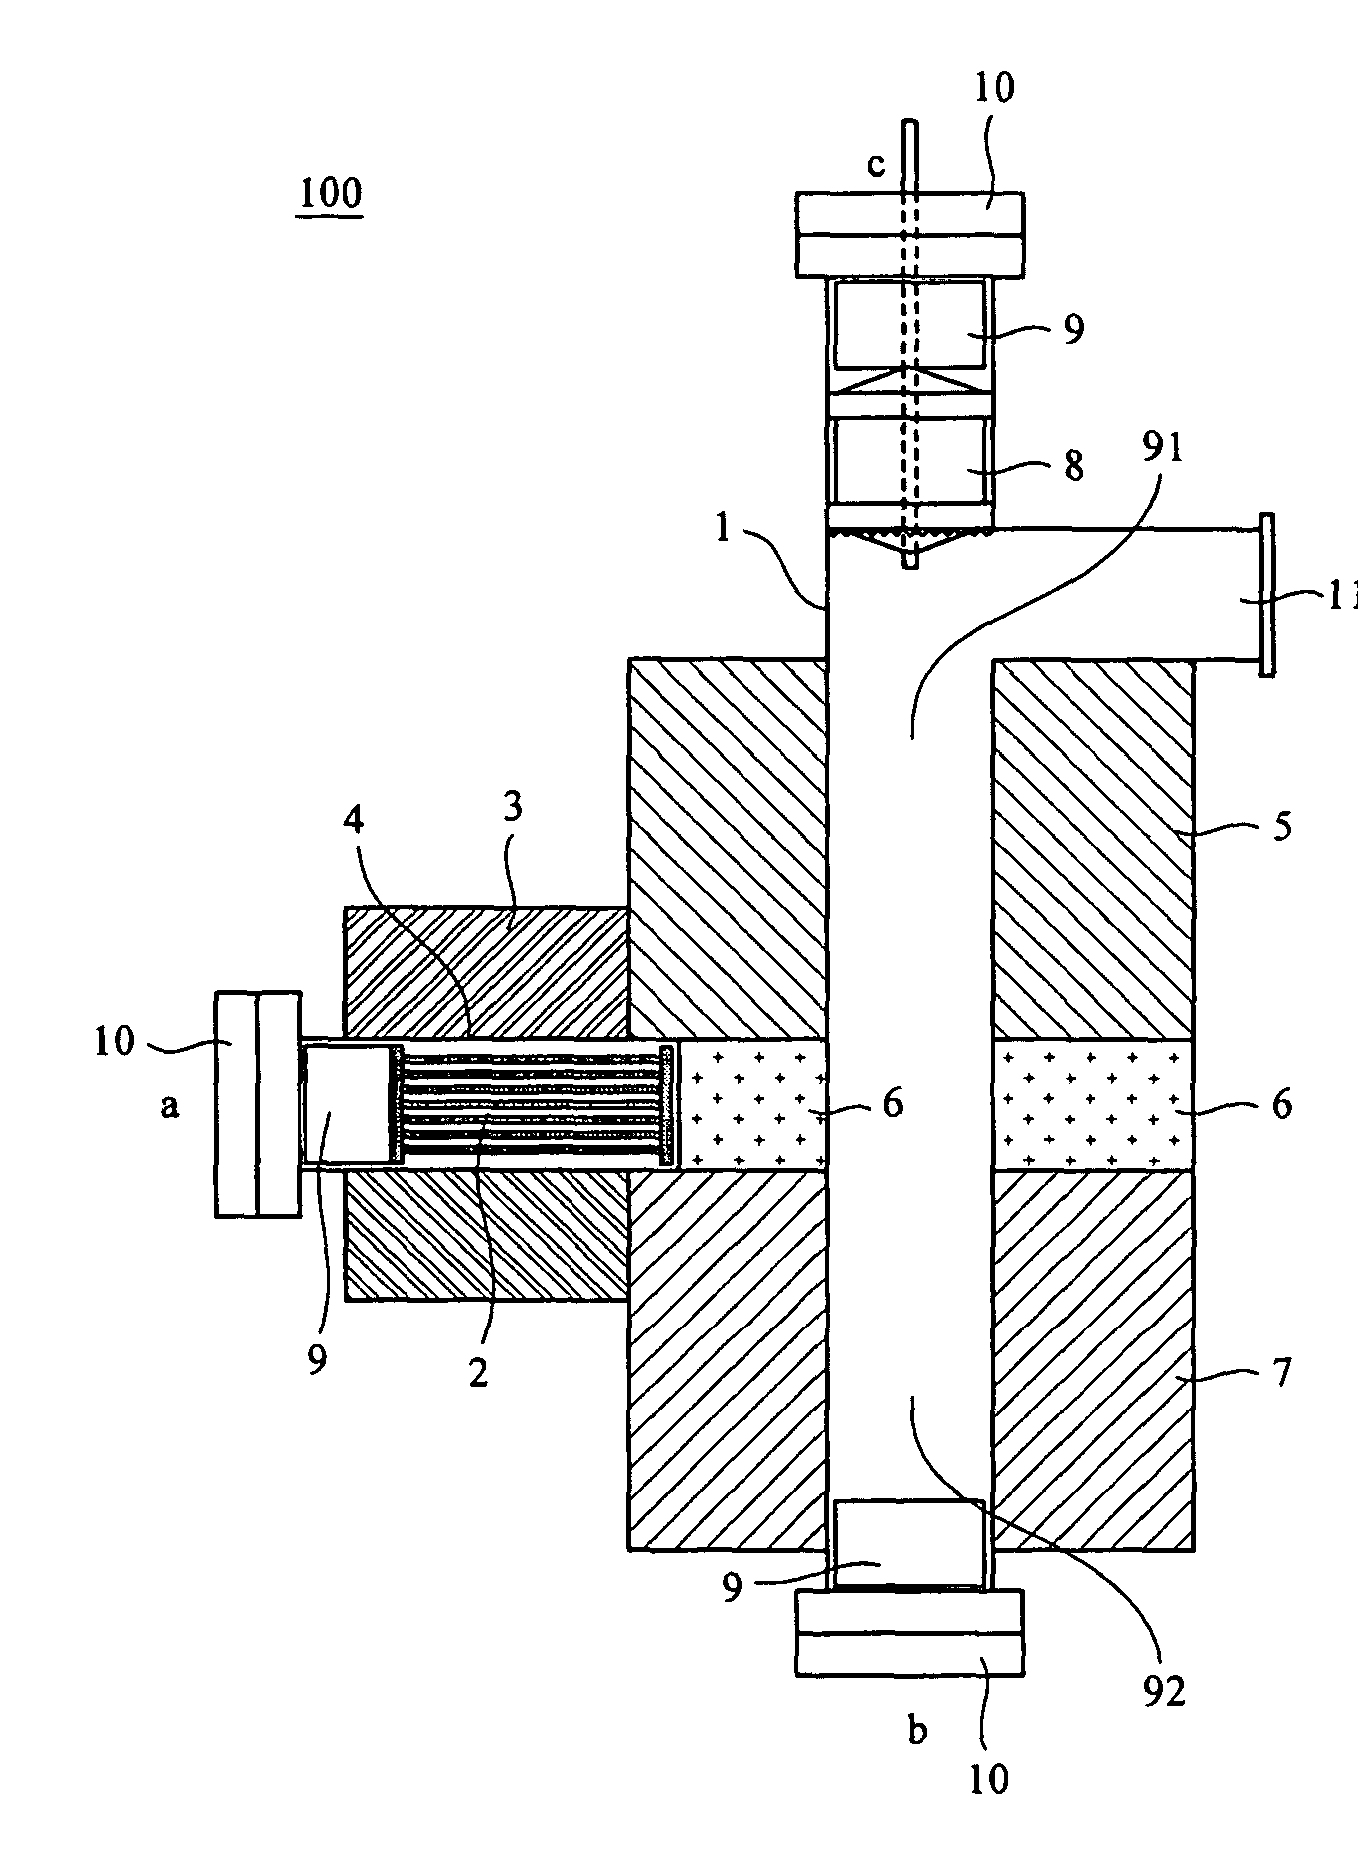 Apparatus and process for vacuum sublimation